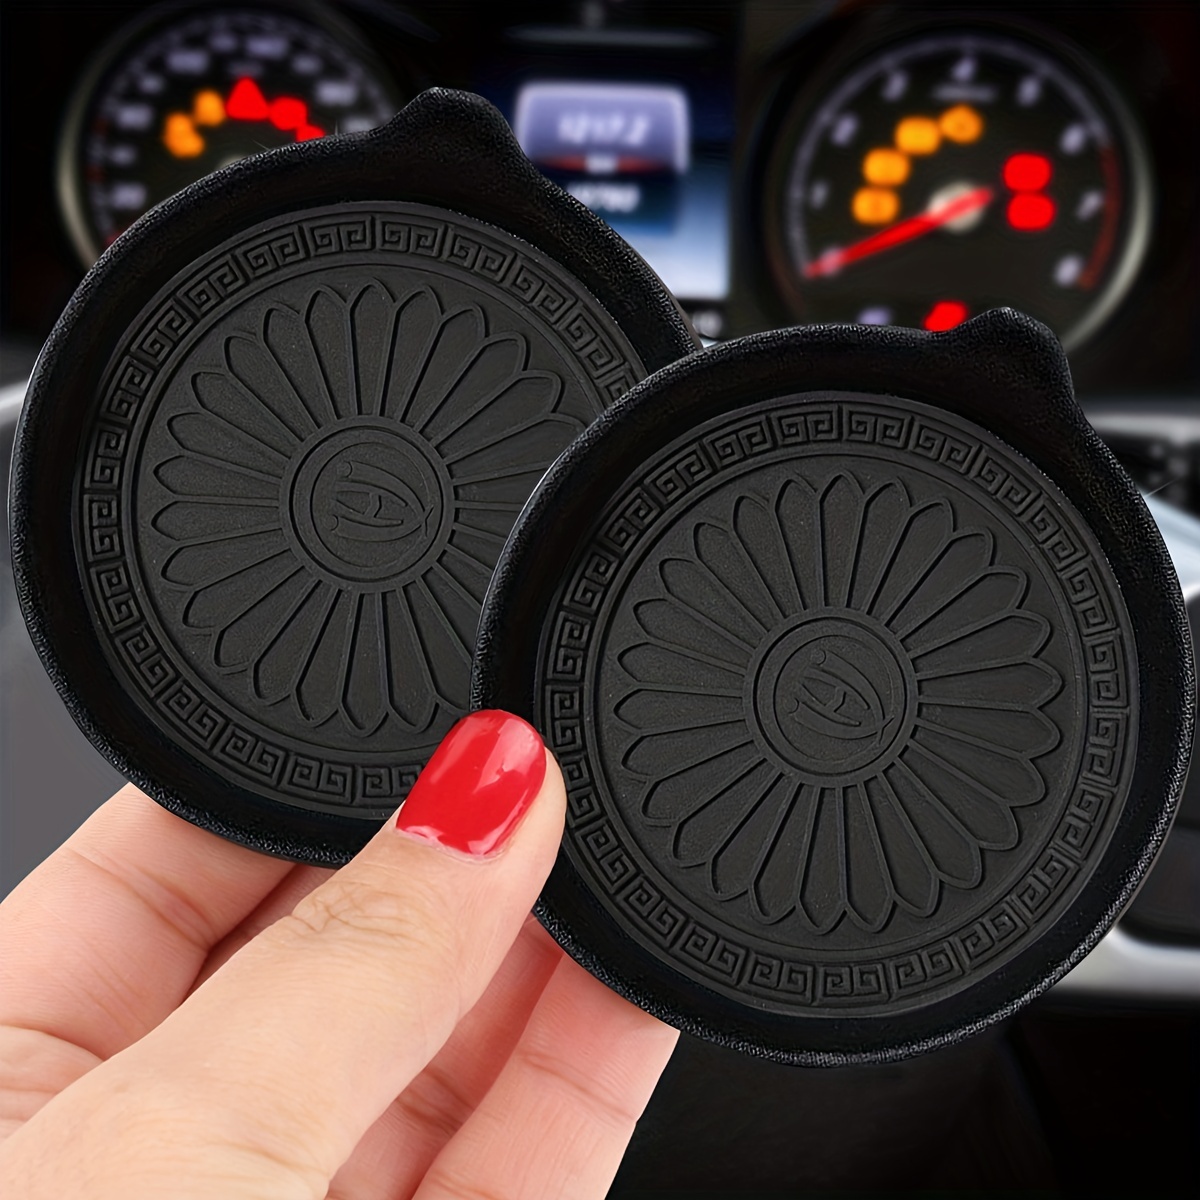 4PCS Car Coaster, Silicone Waterproof Cup Holder Insert Coasters